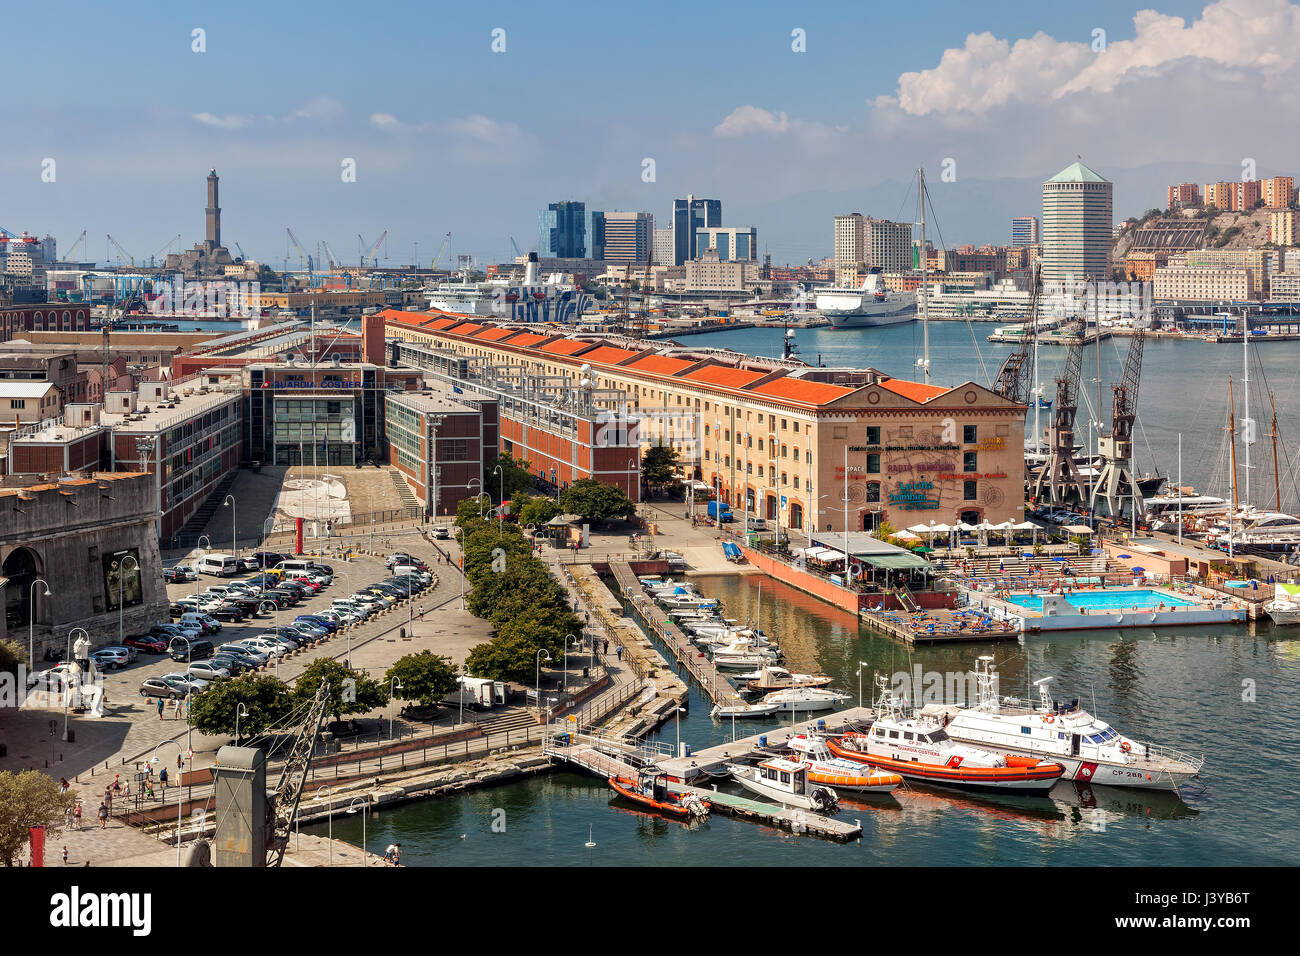 GENOA, ITALY - SEPTEMBER 02, 2016: View from above on port of Genoa - capital of Liguria region,  sixth-largest city with second-busiest port in Italy Stock Photo